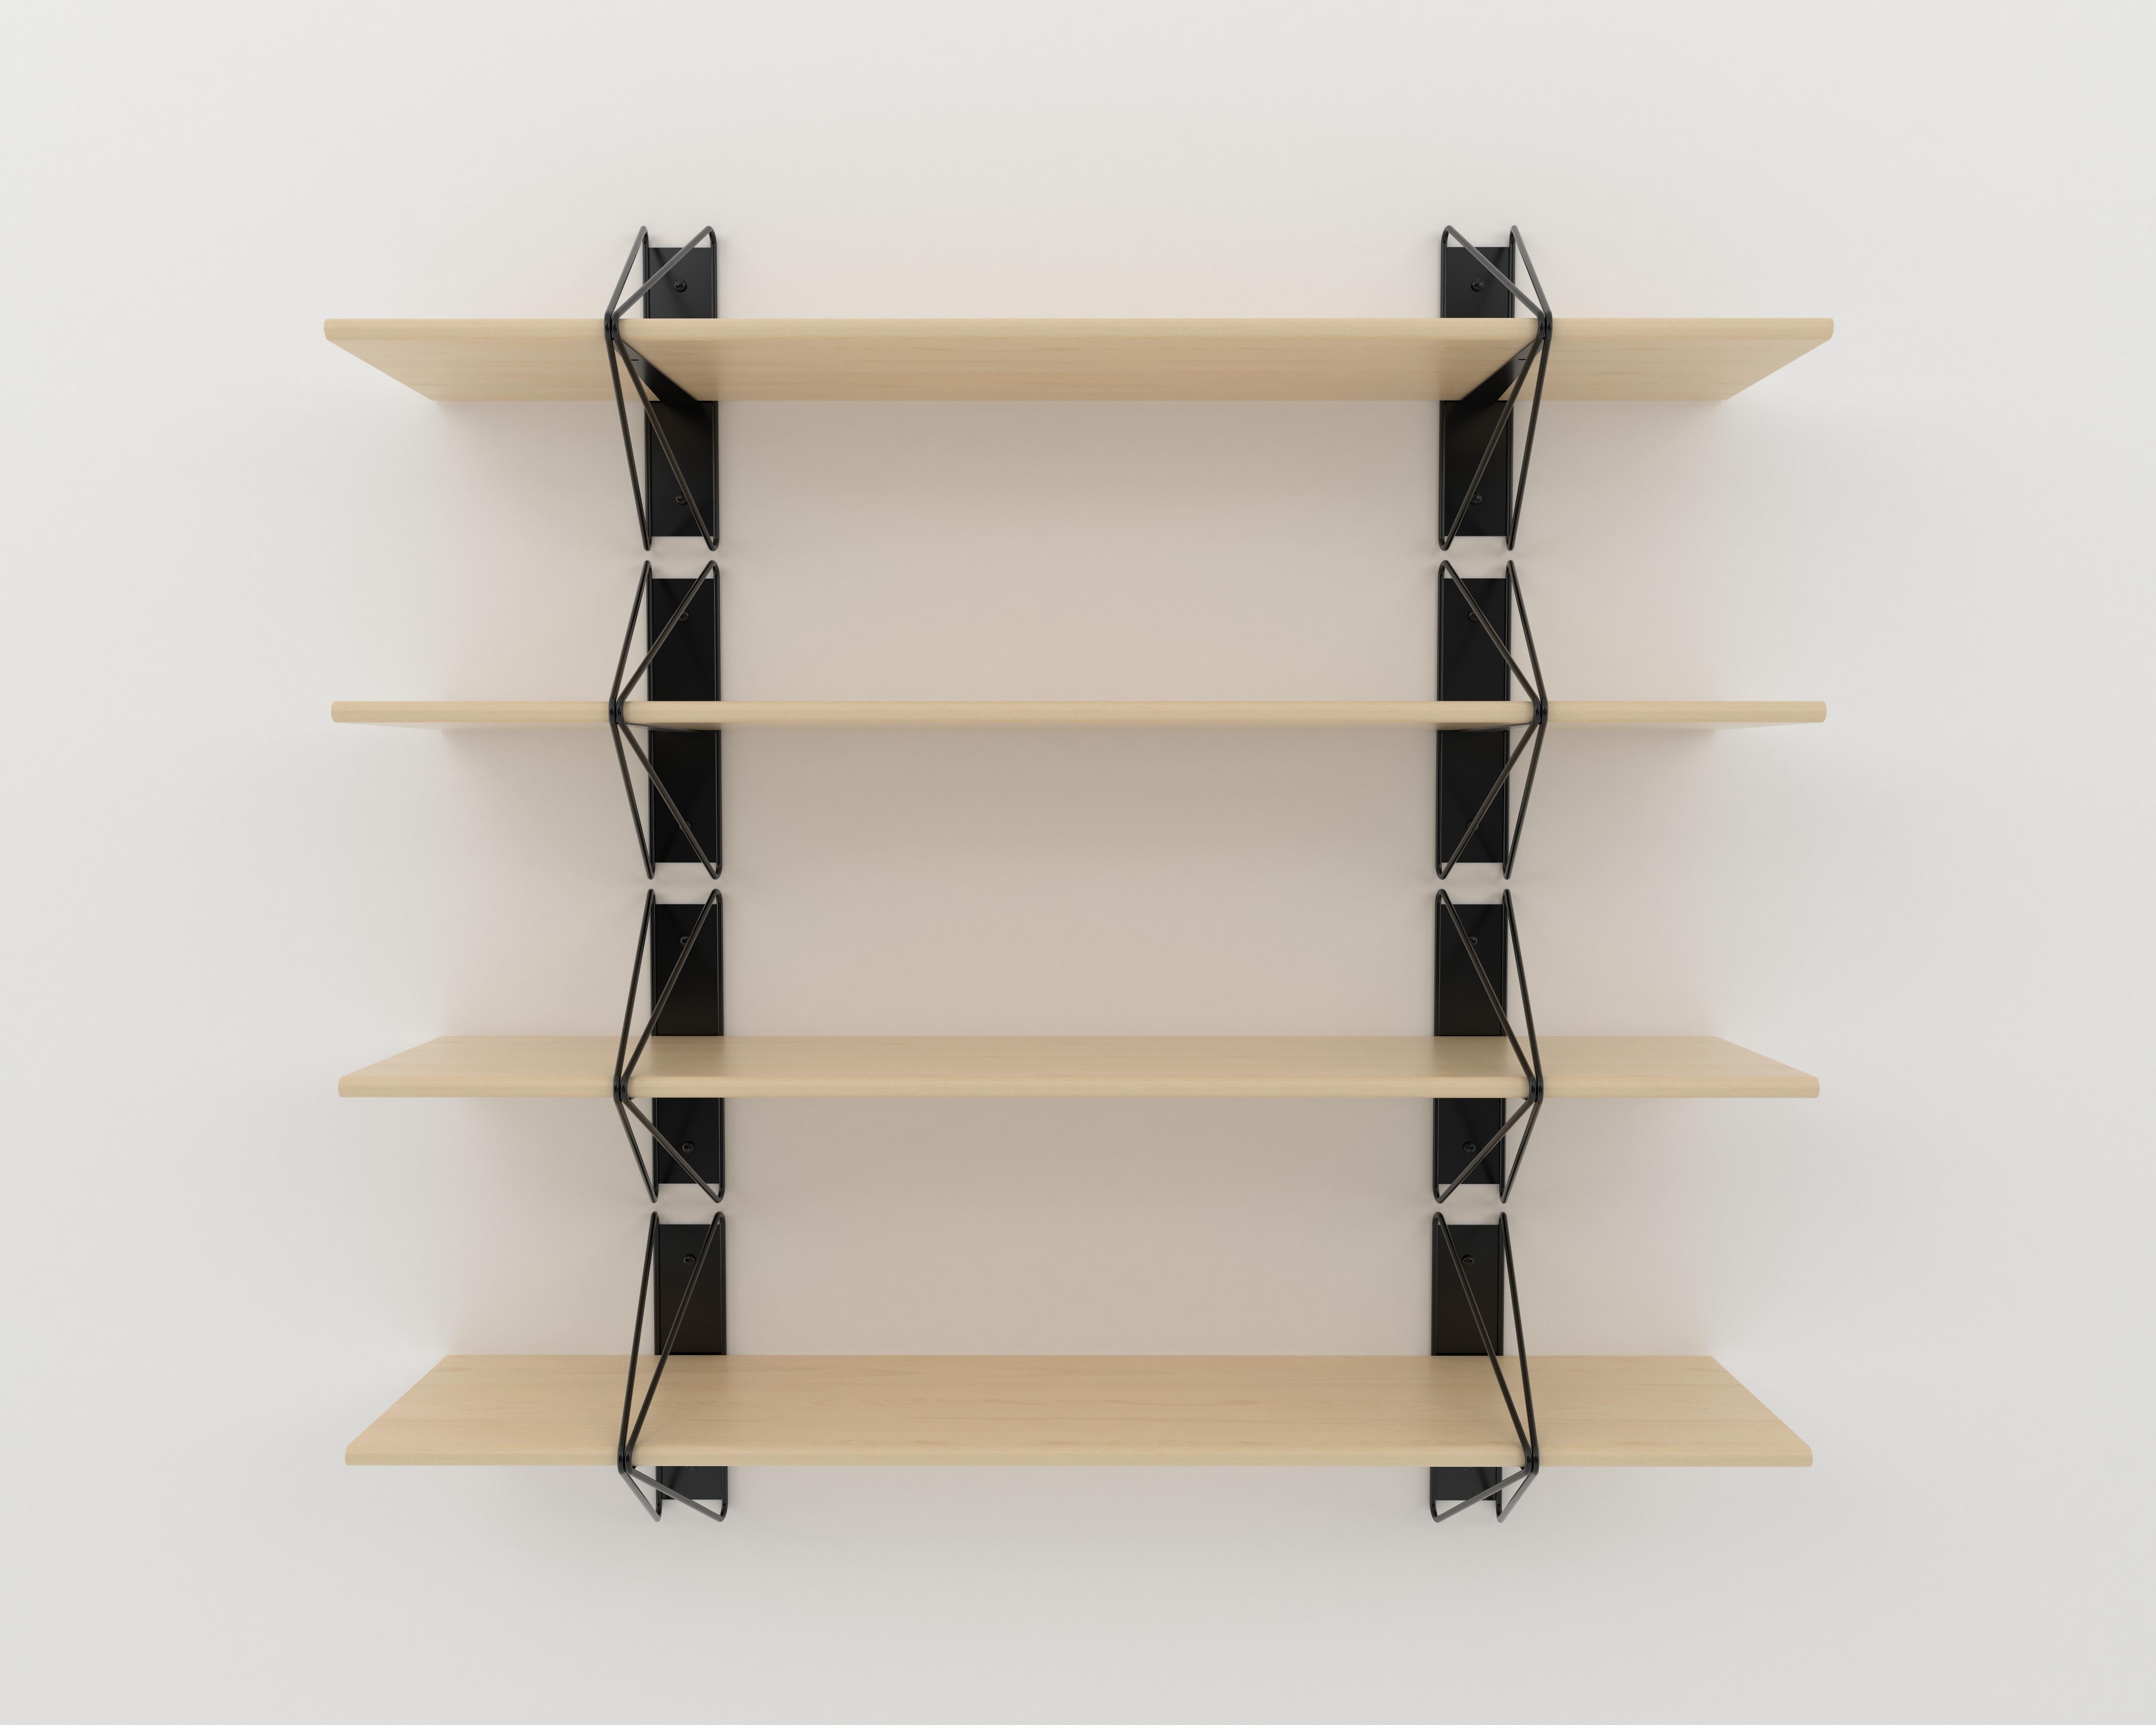 American Set of 3 Strut Shelves from Souda, 52in, Black and Maple, Made to Order For Sale